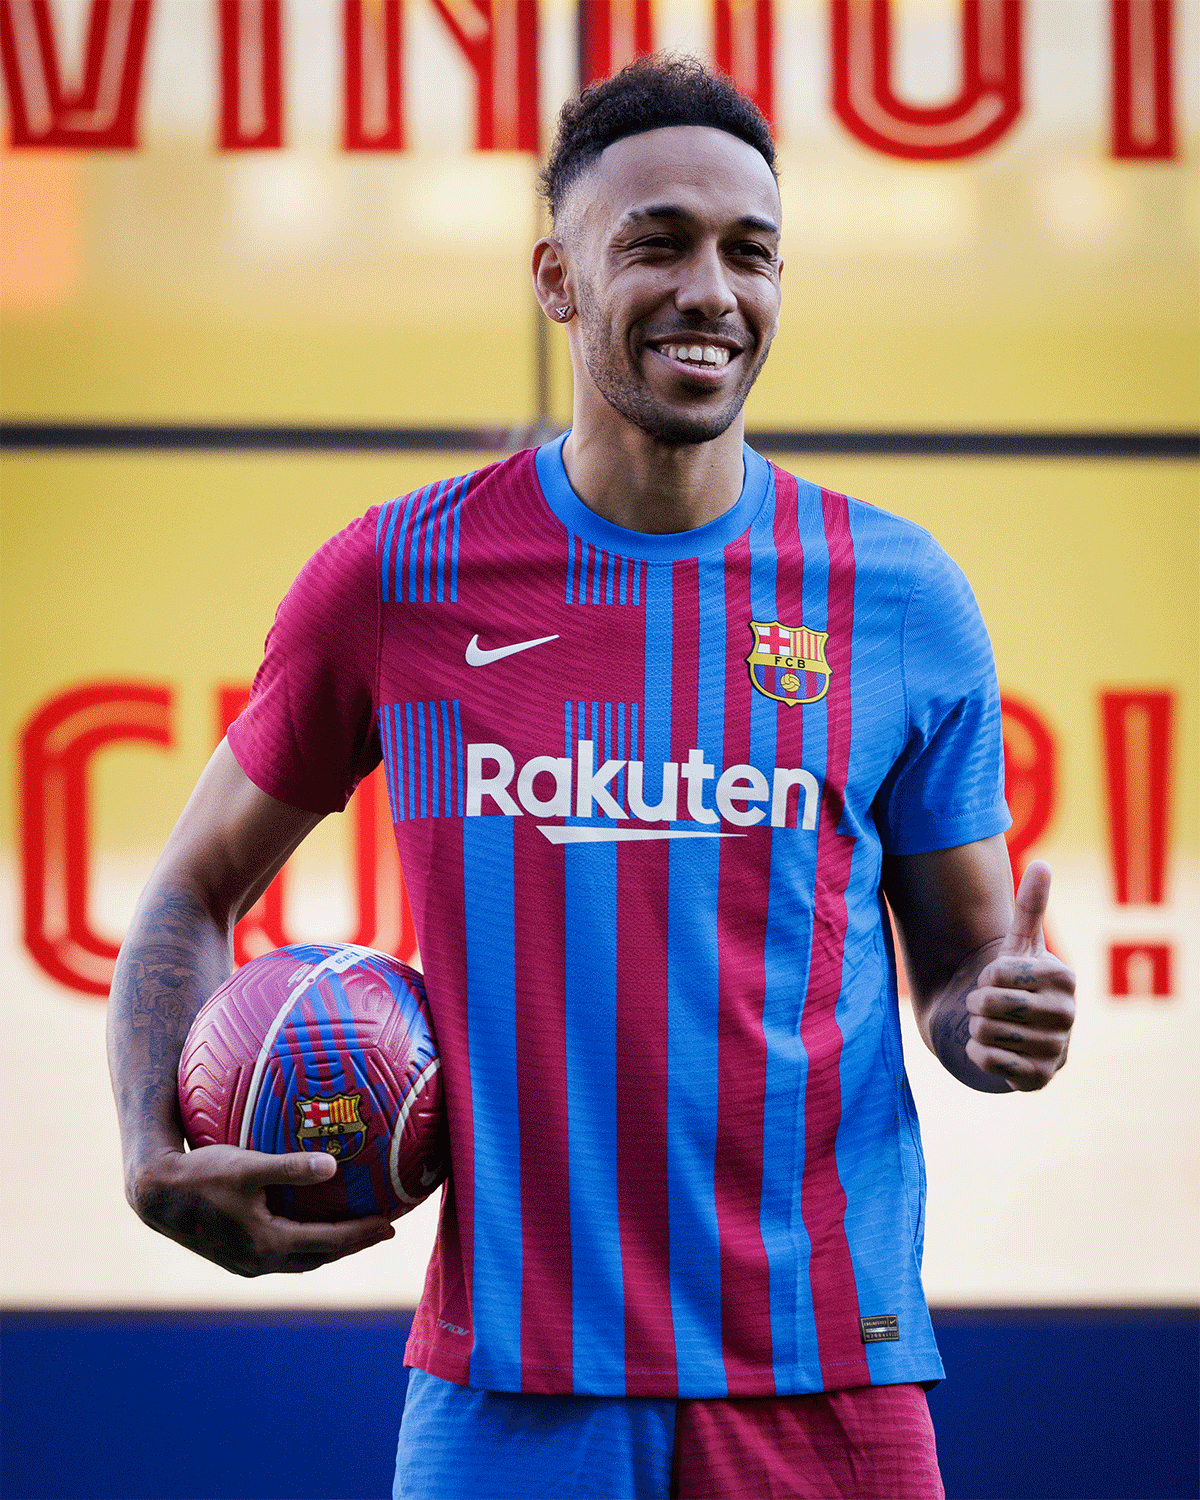 Pierre-Emerick Aubameyang's signing follows the arrival of winger Adama Traore on loan from Wolverhampton Wanderers as Barcelona look to rebuild after the departure of Lionel Messi to Paris St Germain.